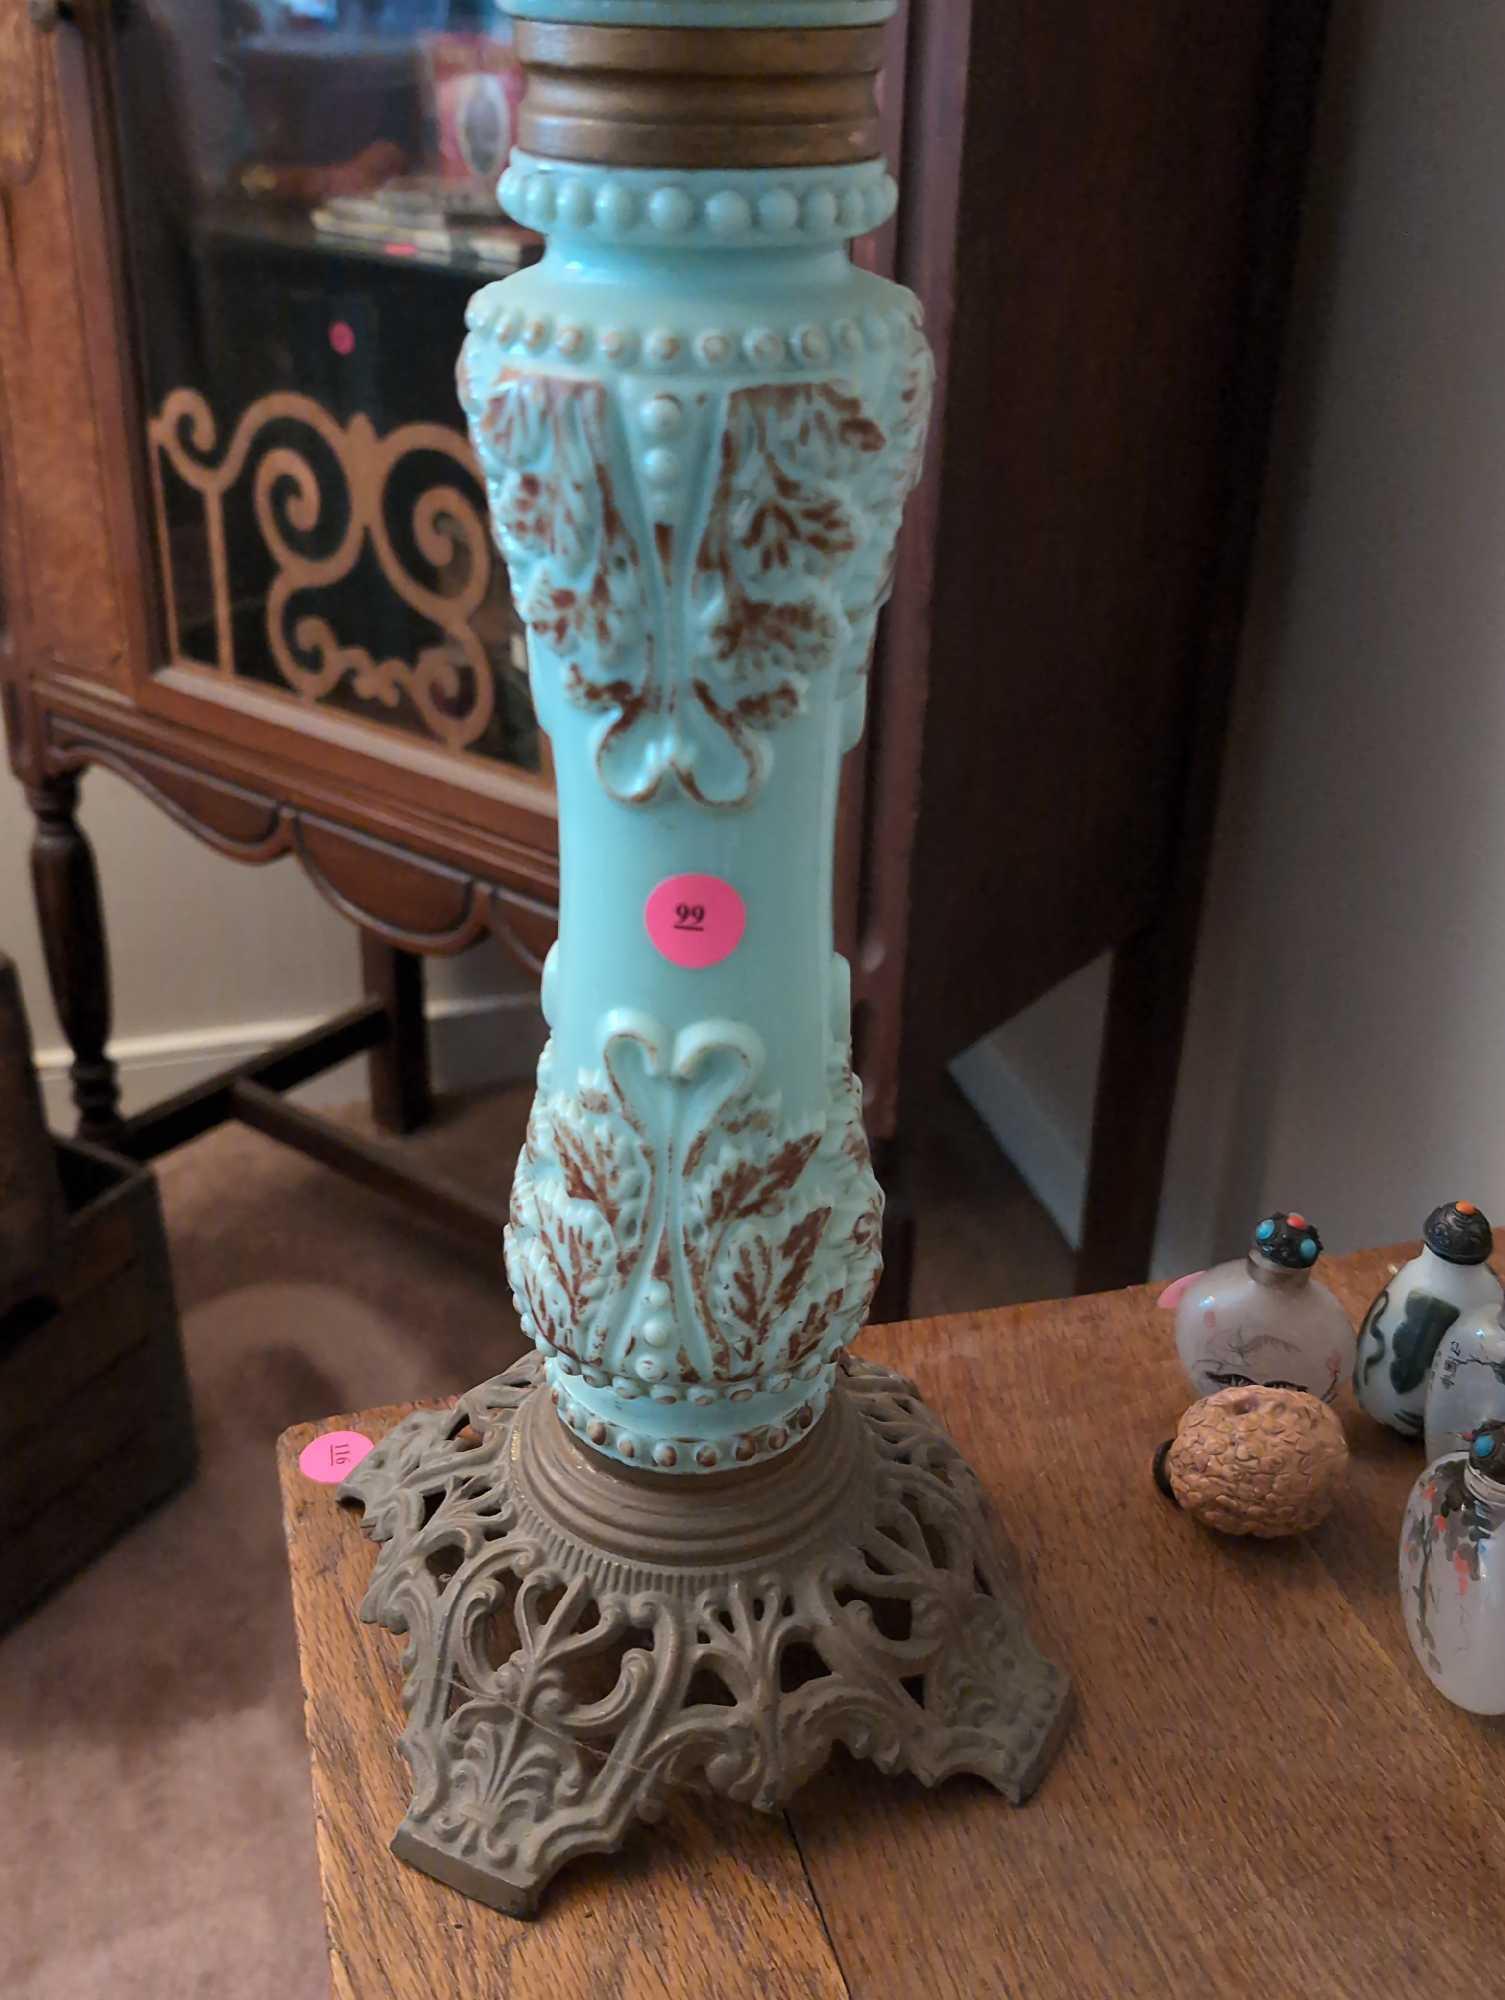 (LR) ANTIQUE CELADON GREEN GLASS LAMP WITH BROWN LEAF ACCENTS, STANDS ON A METAL BASE. IT MEASURES